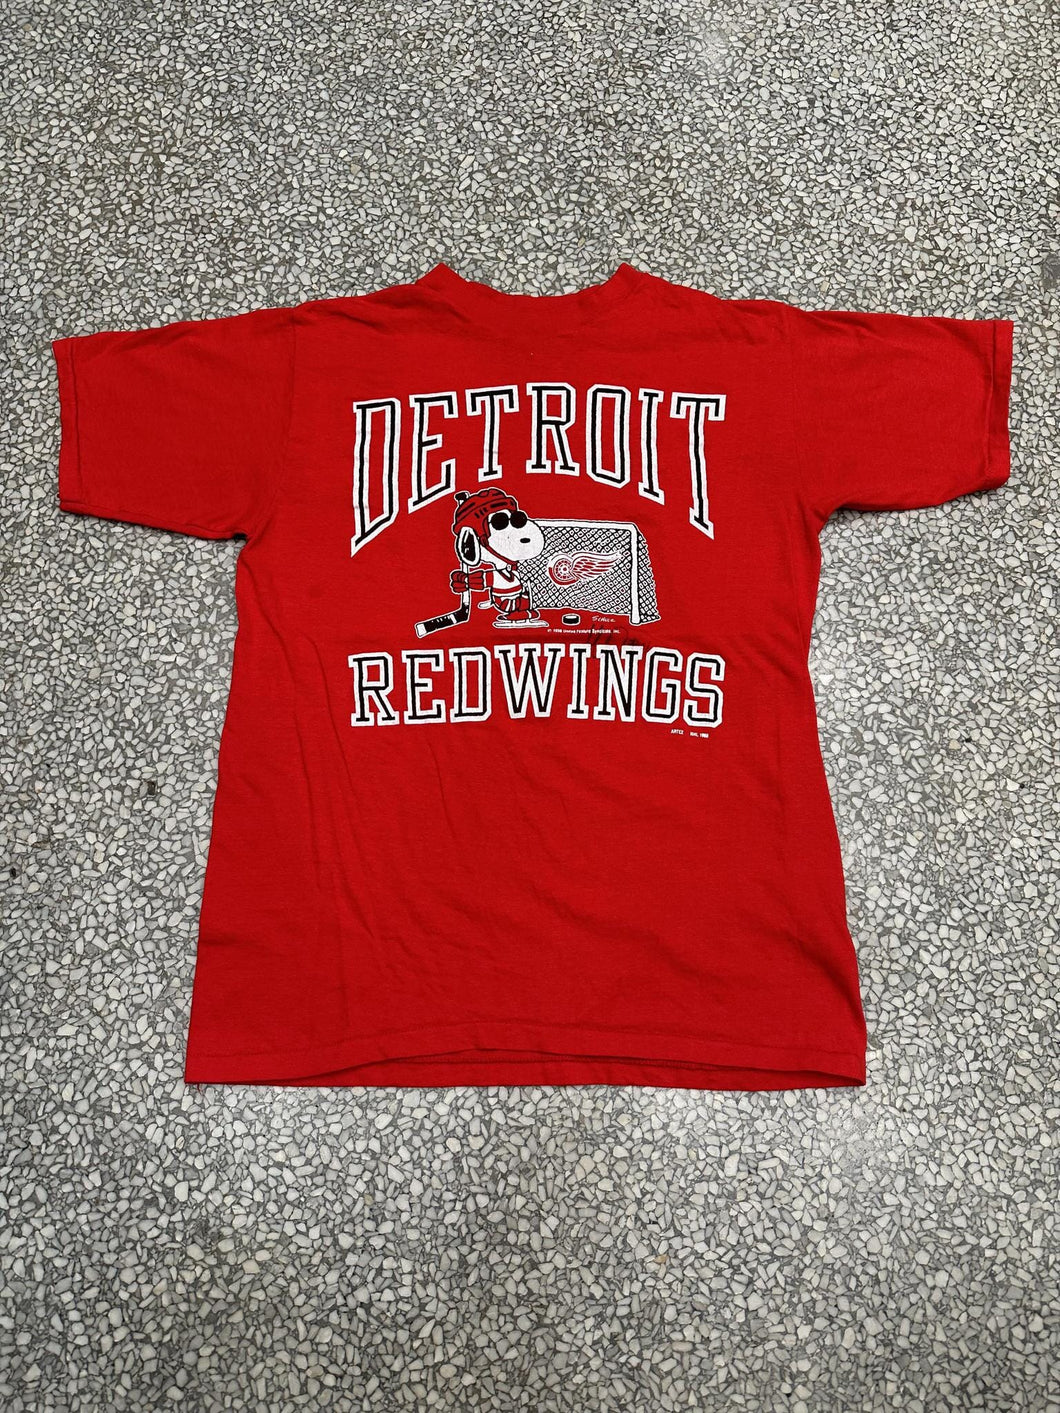 Detroit Red Wings Vintage 80s Snoopy Red ABC Vintage 